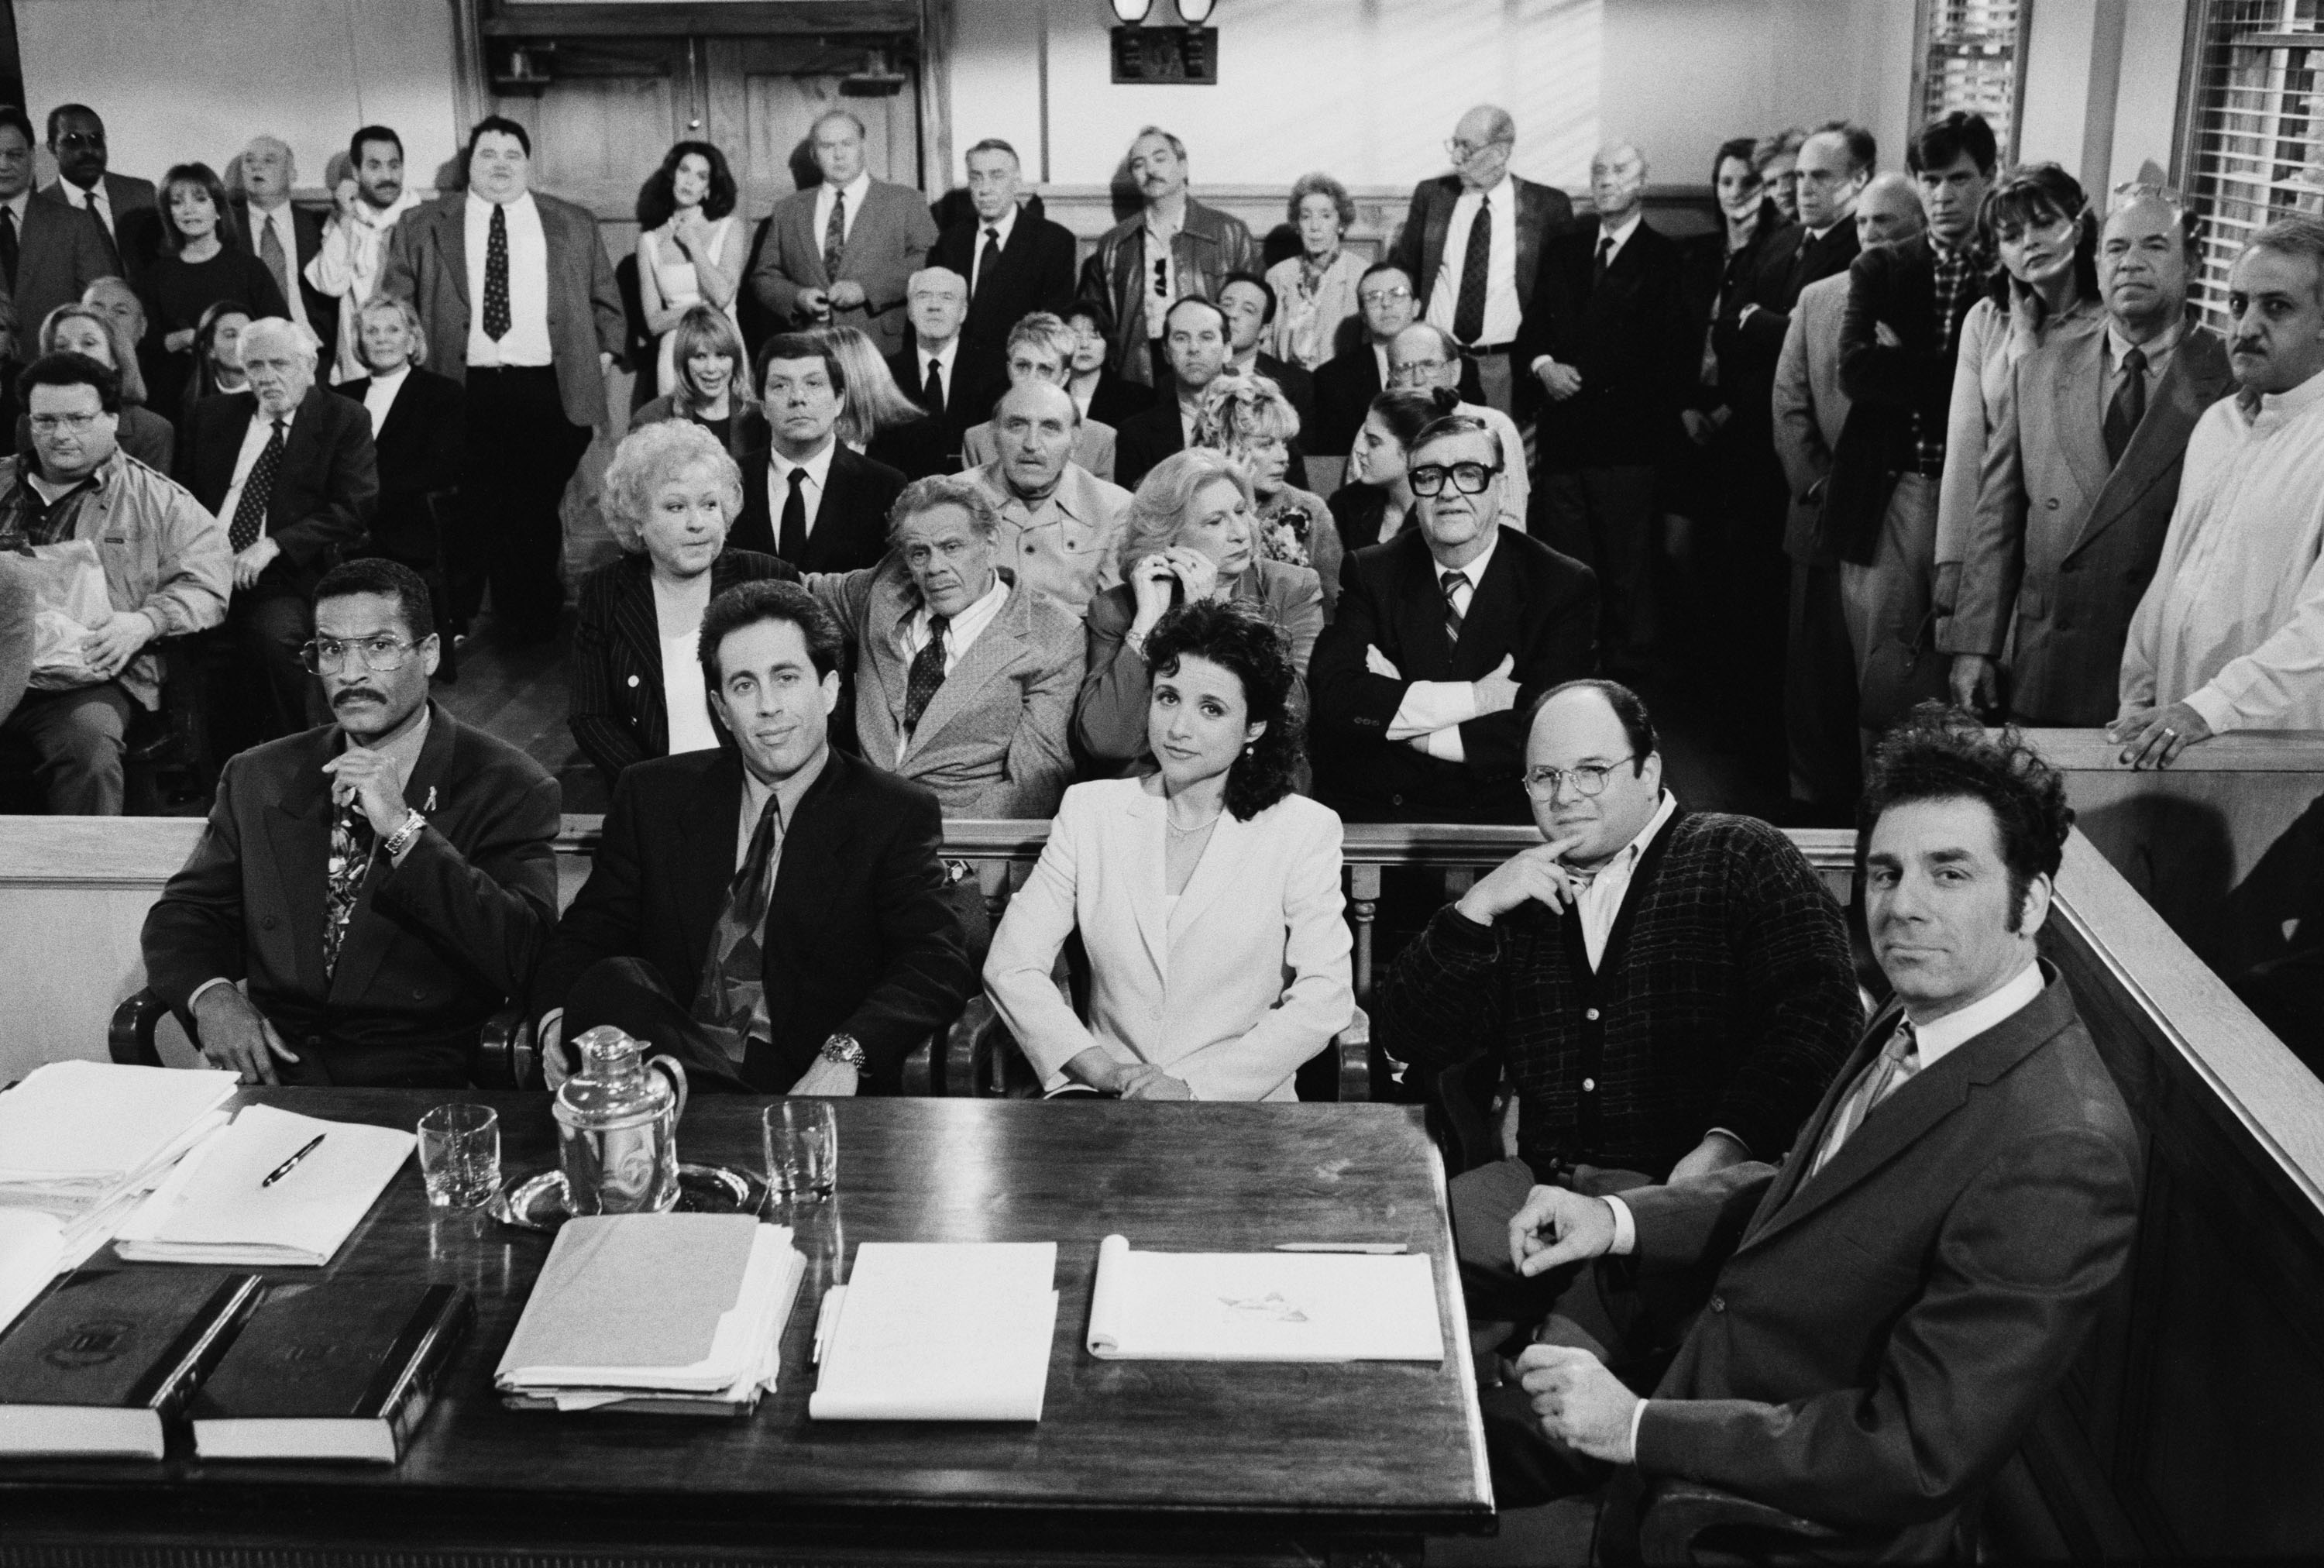 The courtroom scene from the final days of shooting of 'Seinfeld'